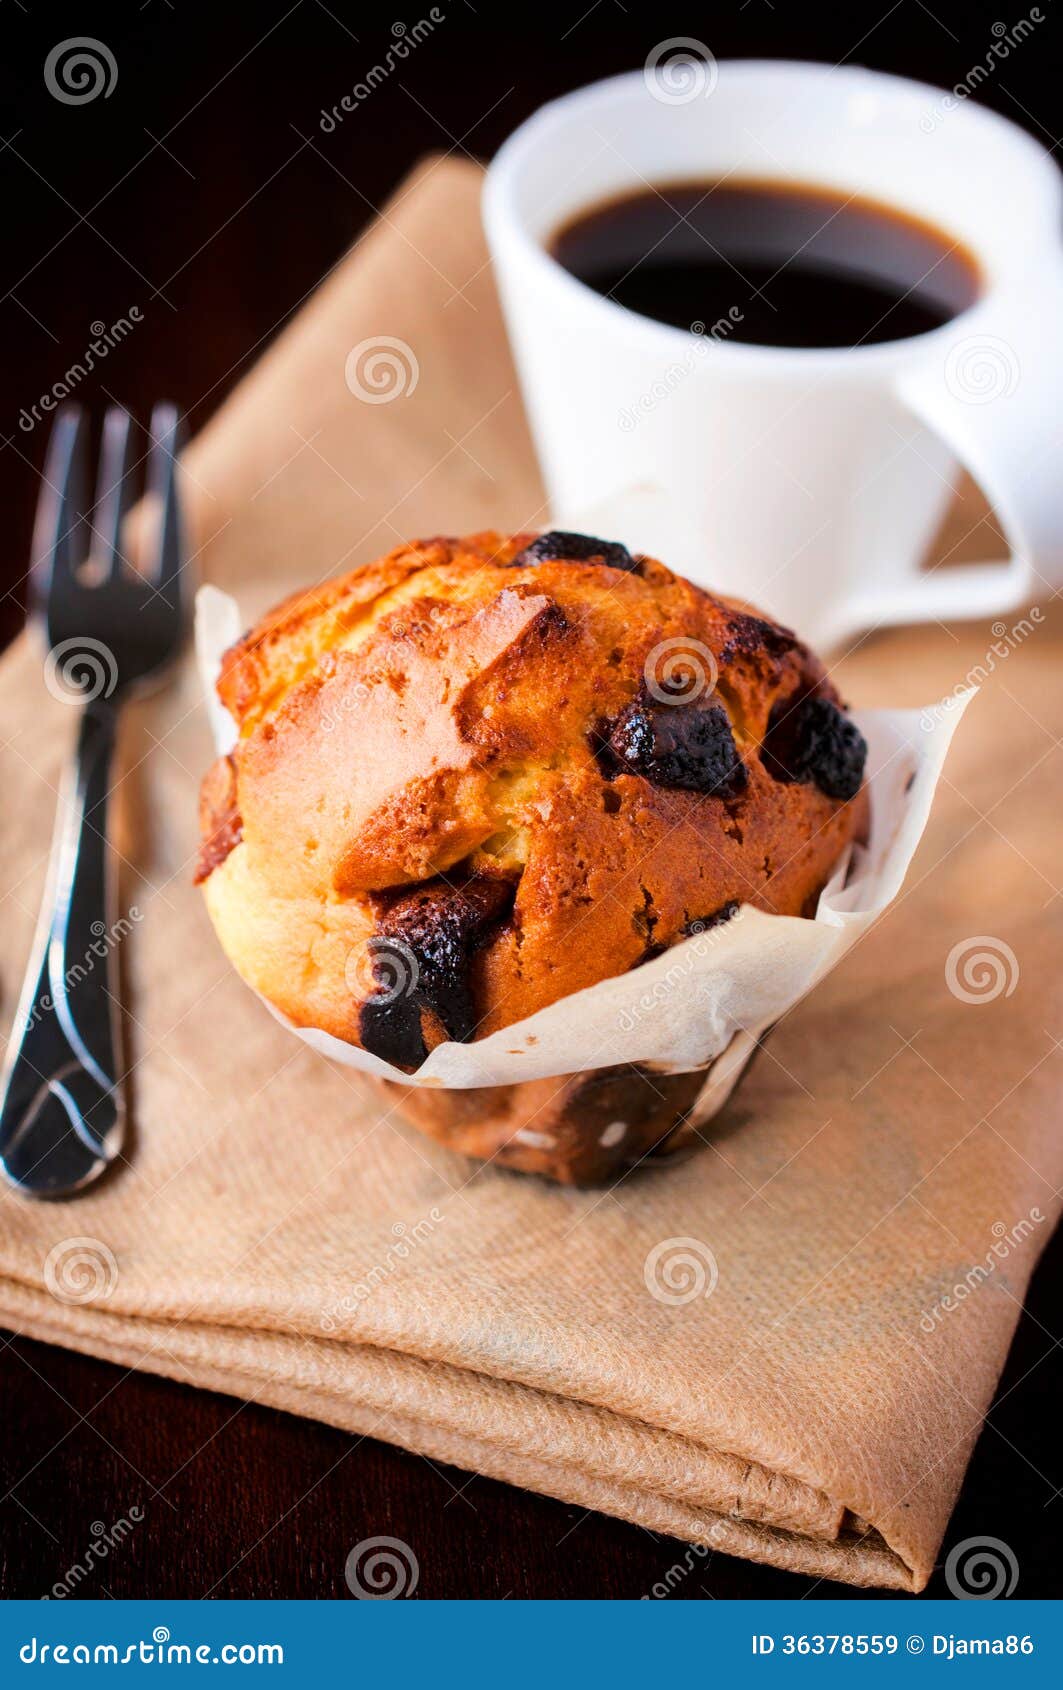 free clipart coffee and muffin - photo #35